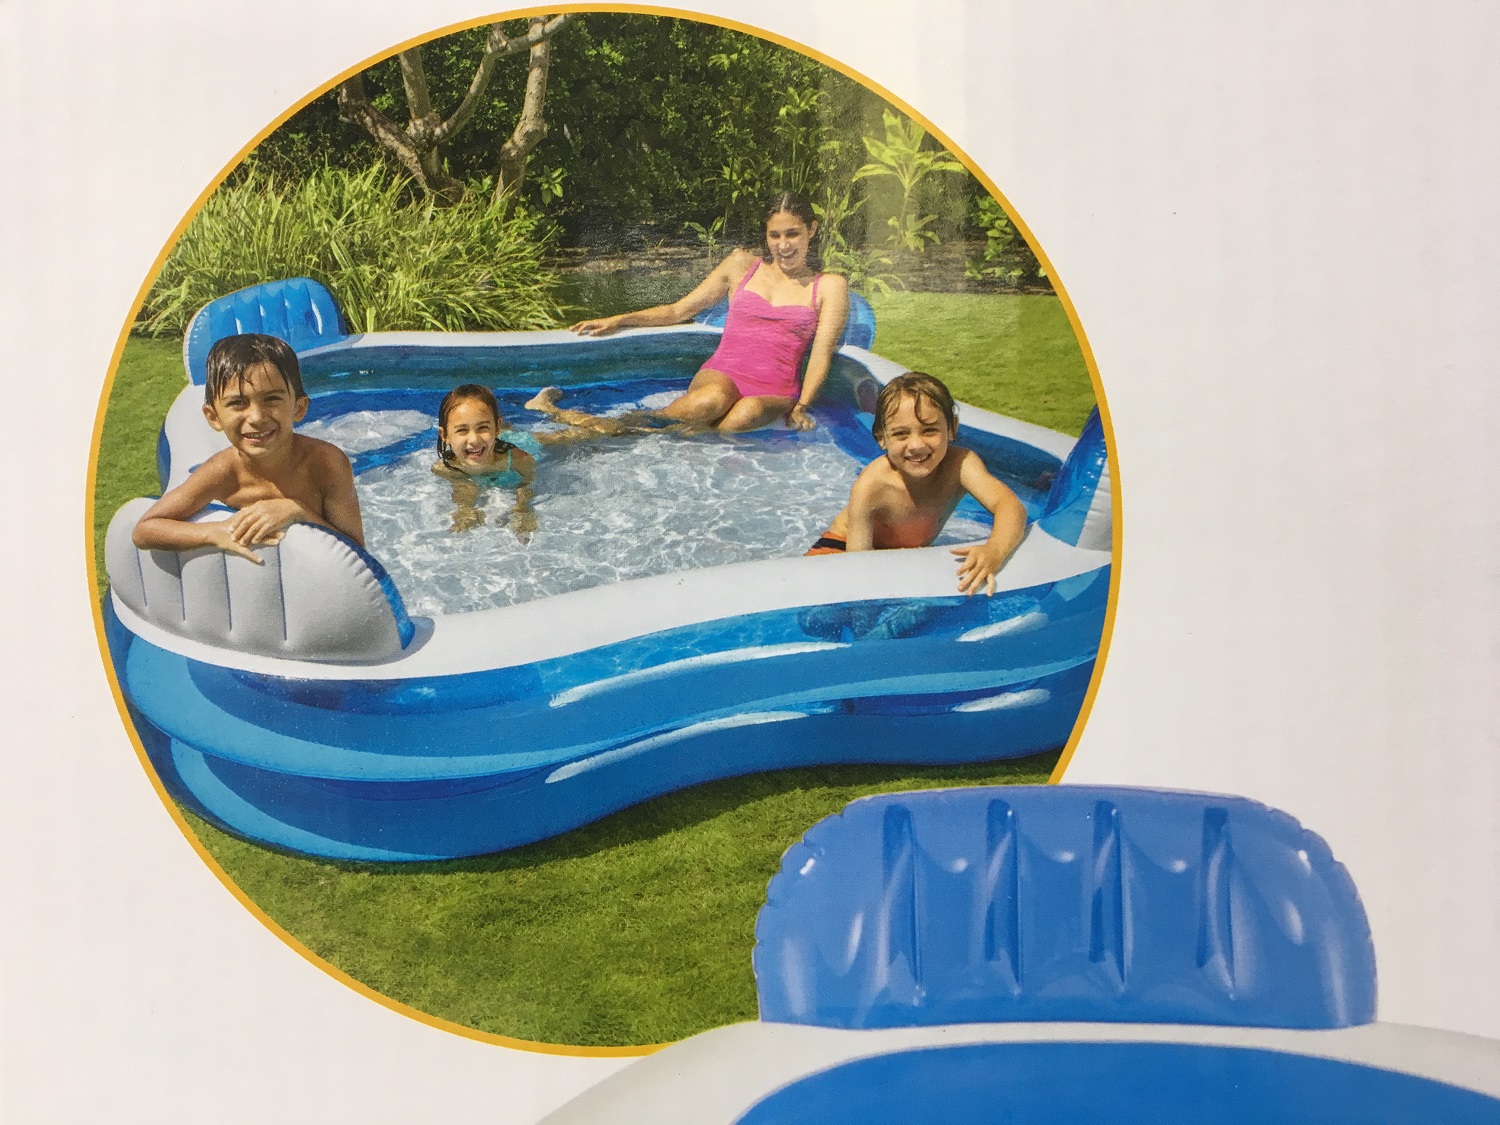 Intex Swim Center Family Lounge Inflatable Pool, 90" X 90" X 26" Ages 3+ - image 5 of 5